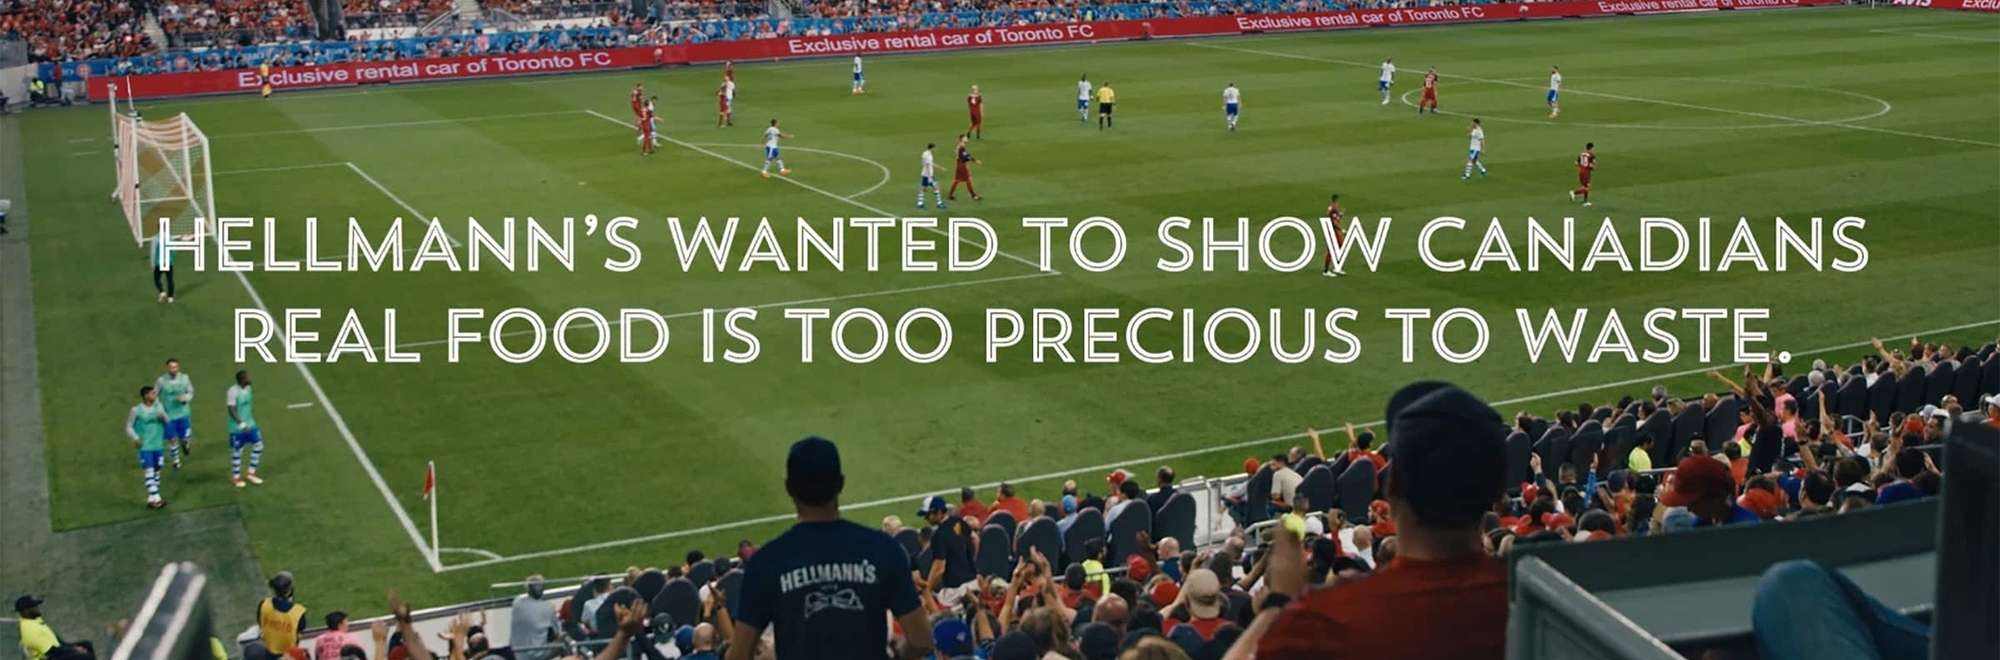 With food waste reaching epidemic proportions, Hellmann’s feeds a stadium in Canada to highlight the issue